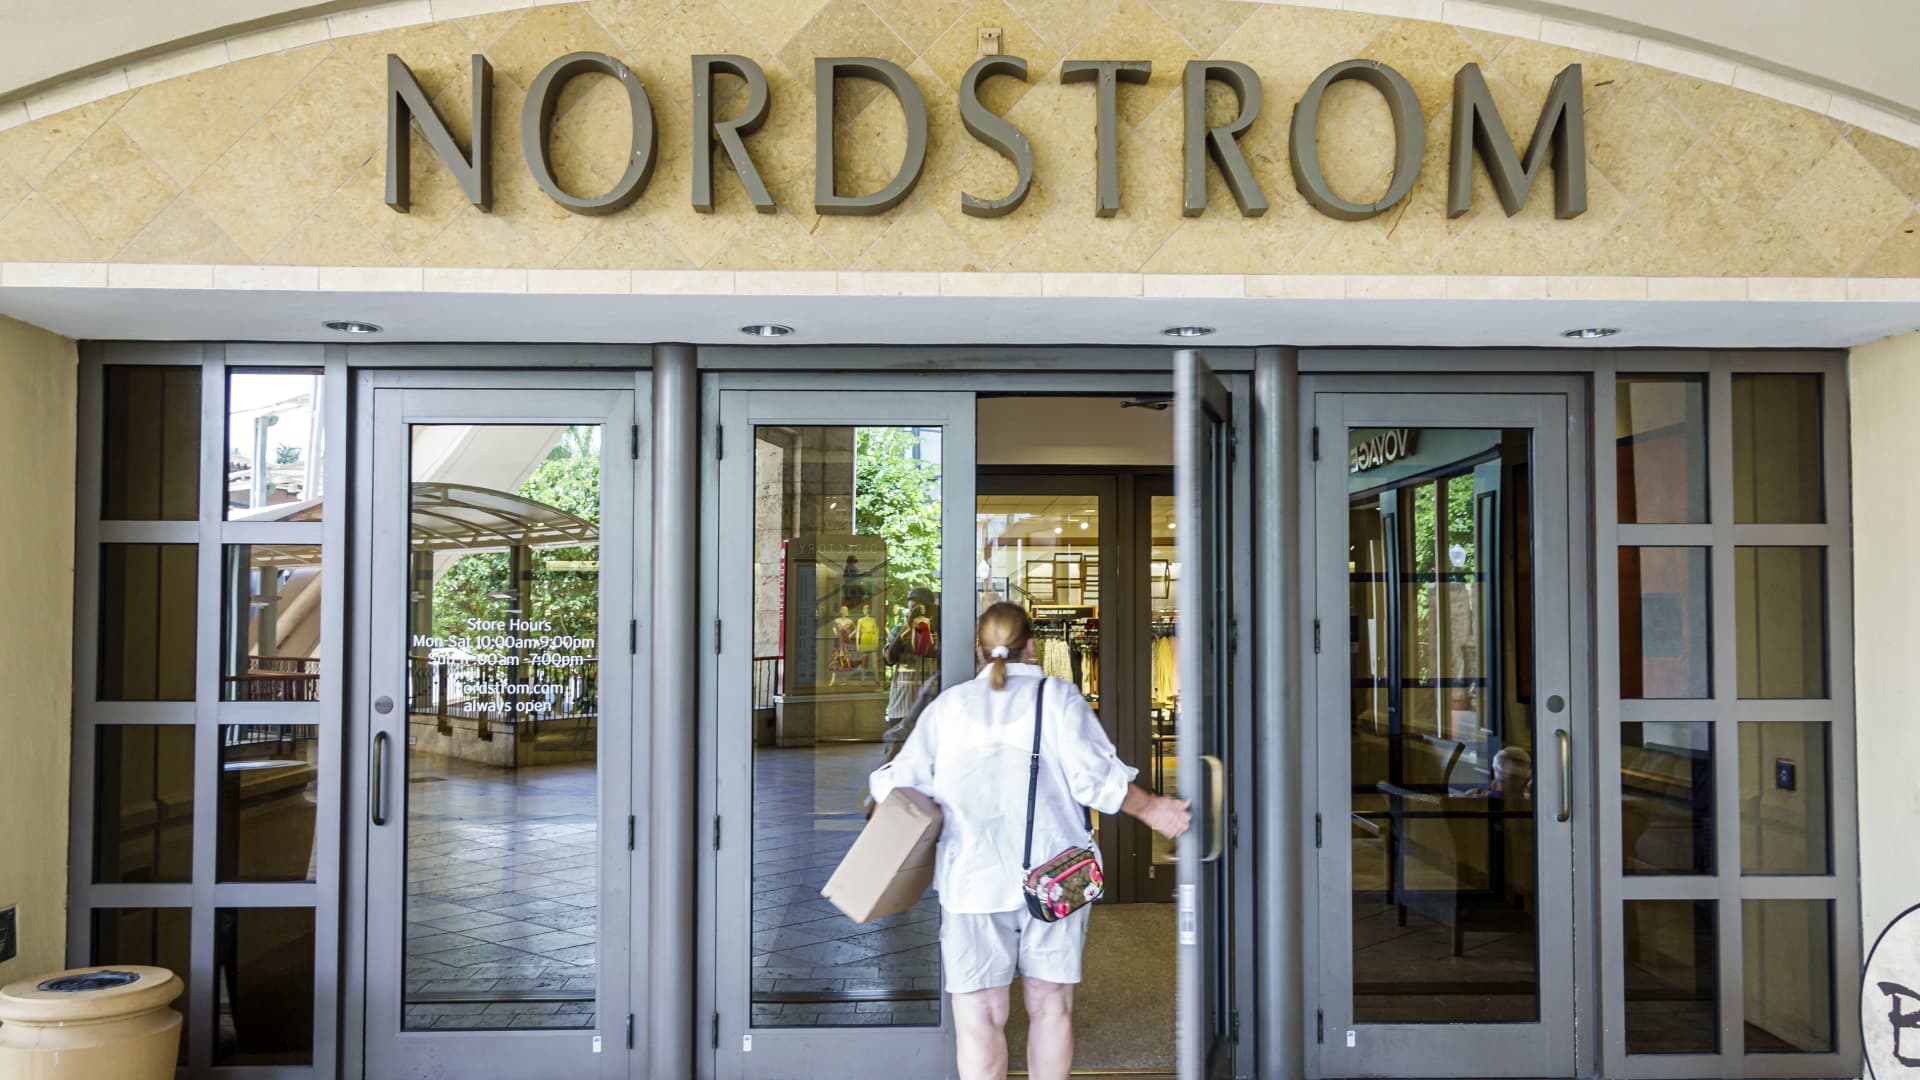 Nordstrom earnings top expectations, retailer says it’s winding down Canada operations